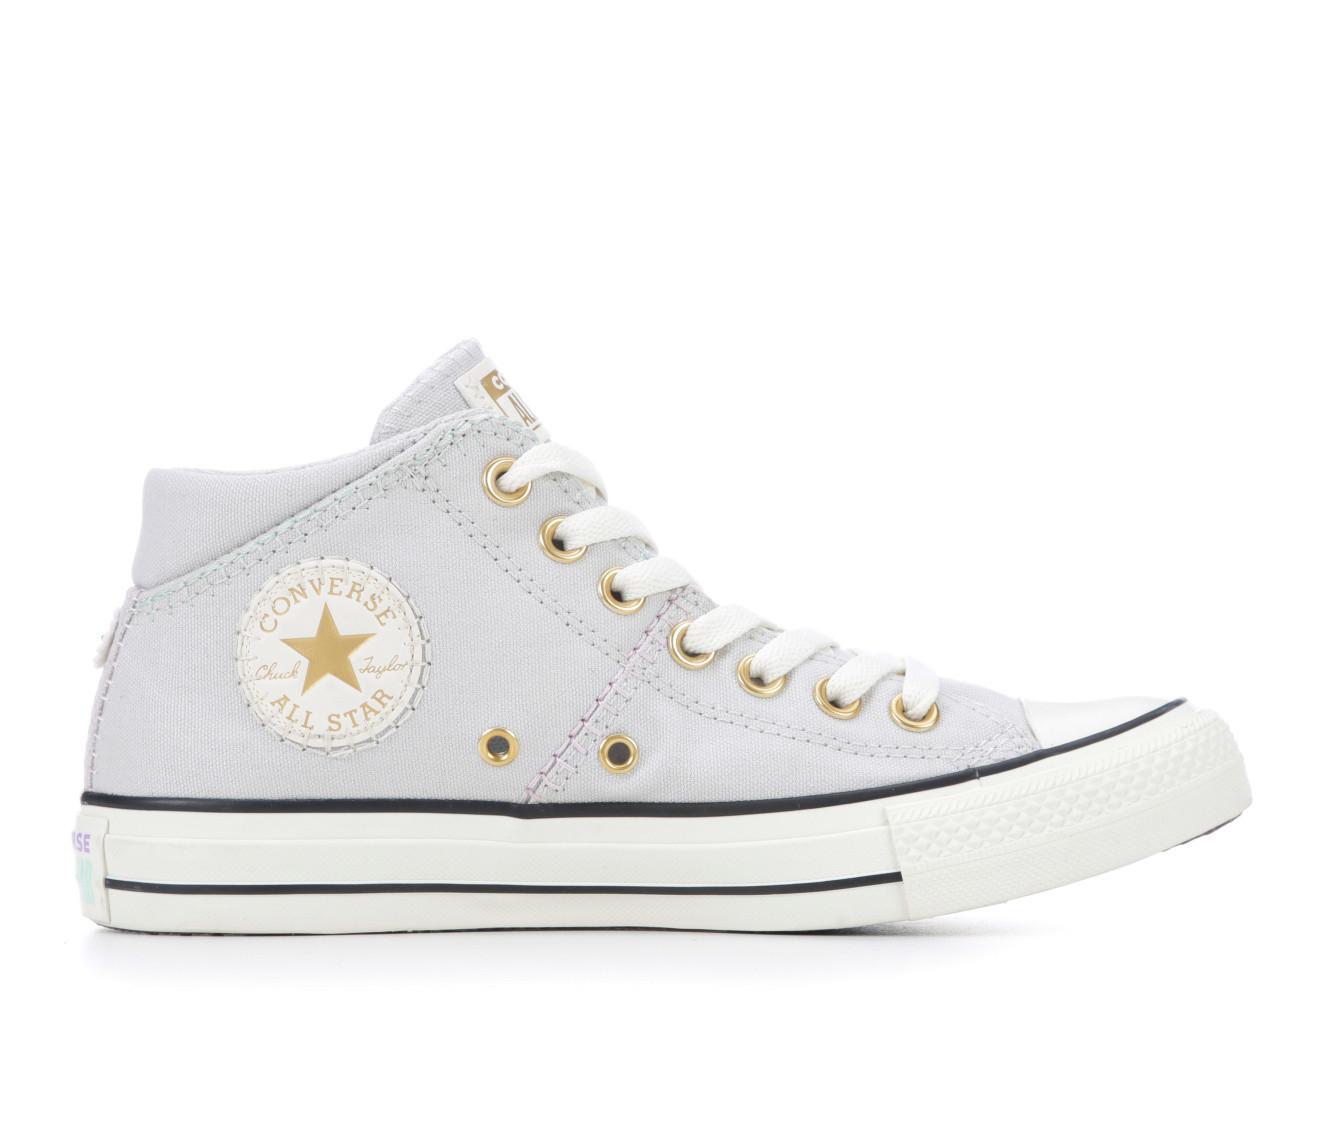 Women's Converse Chuck Taylor All Star Madison Mid Stitch Sneakers